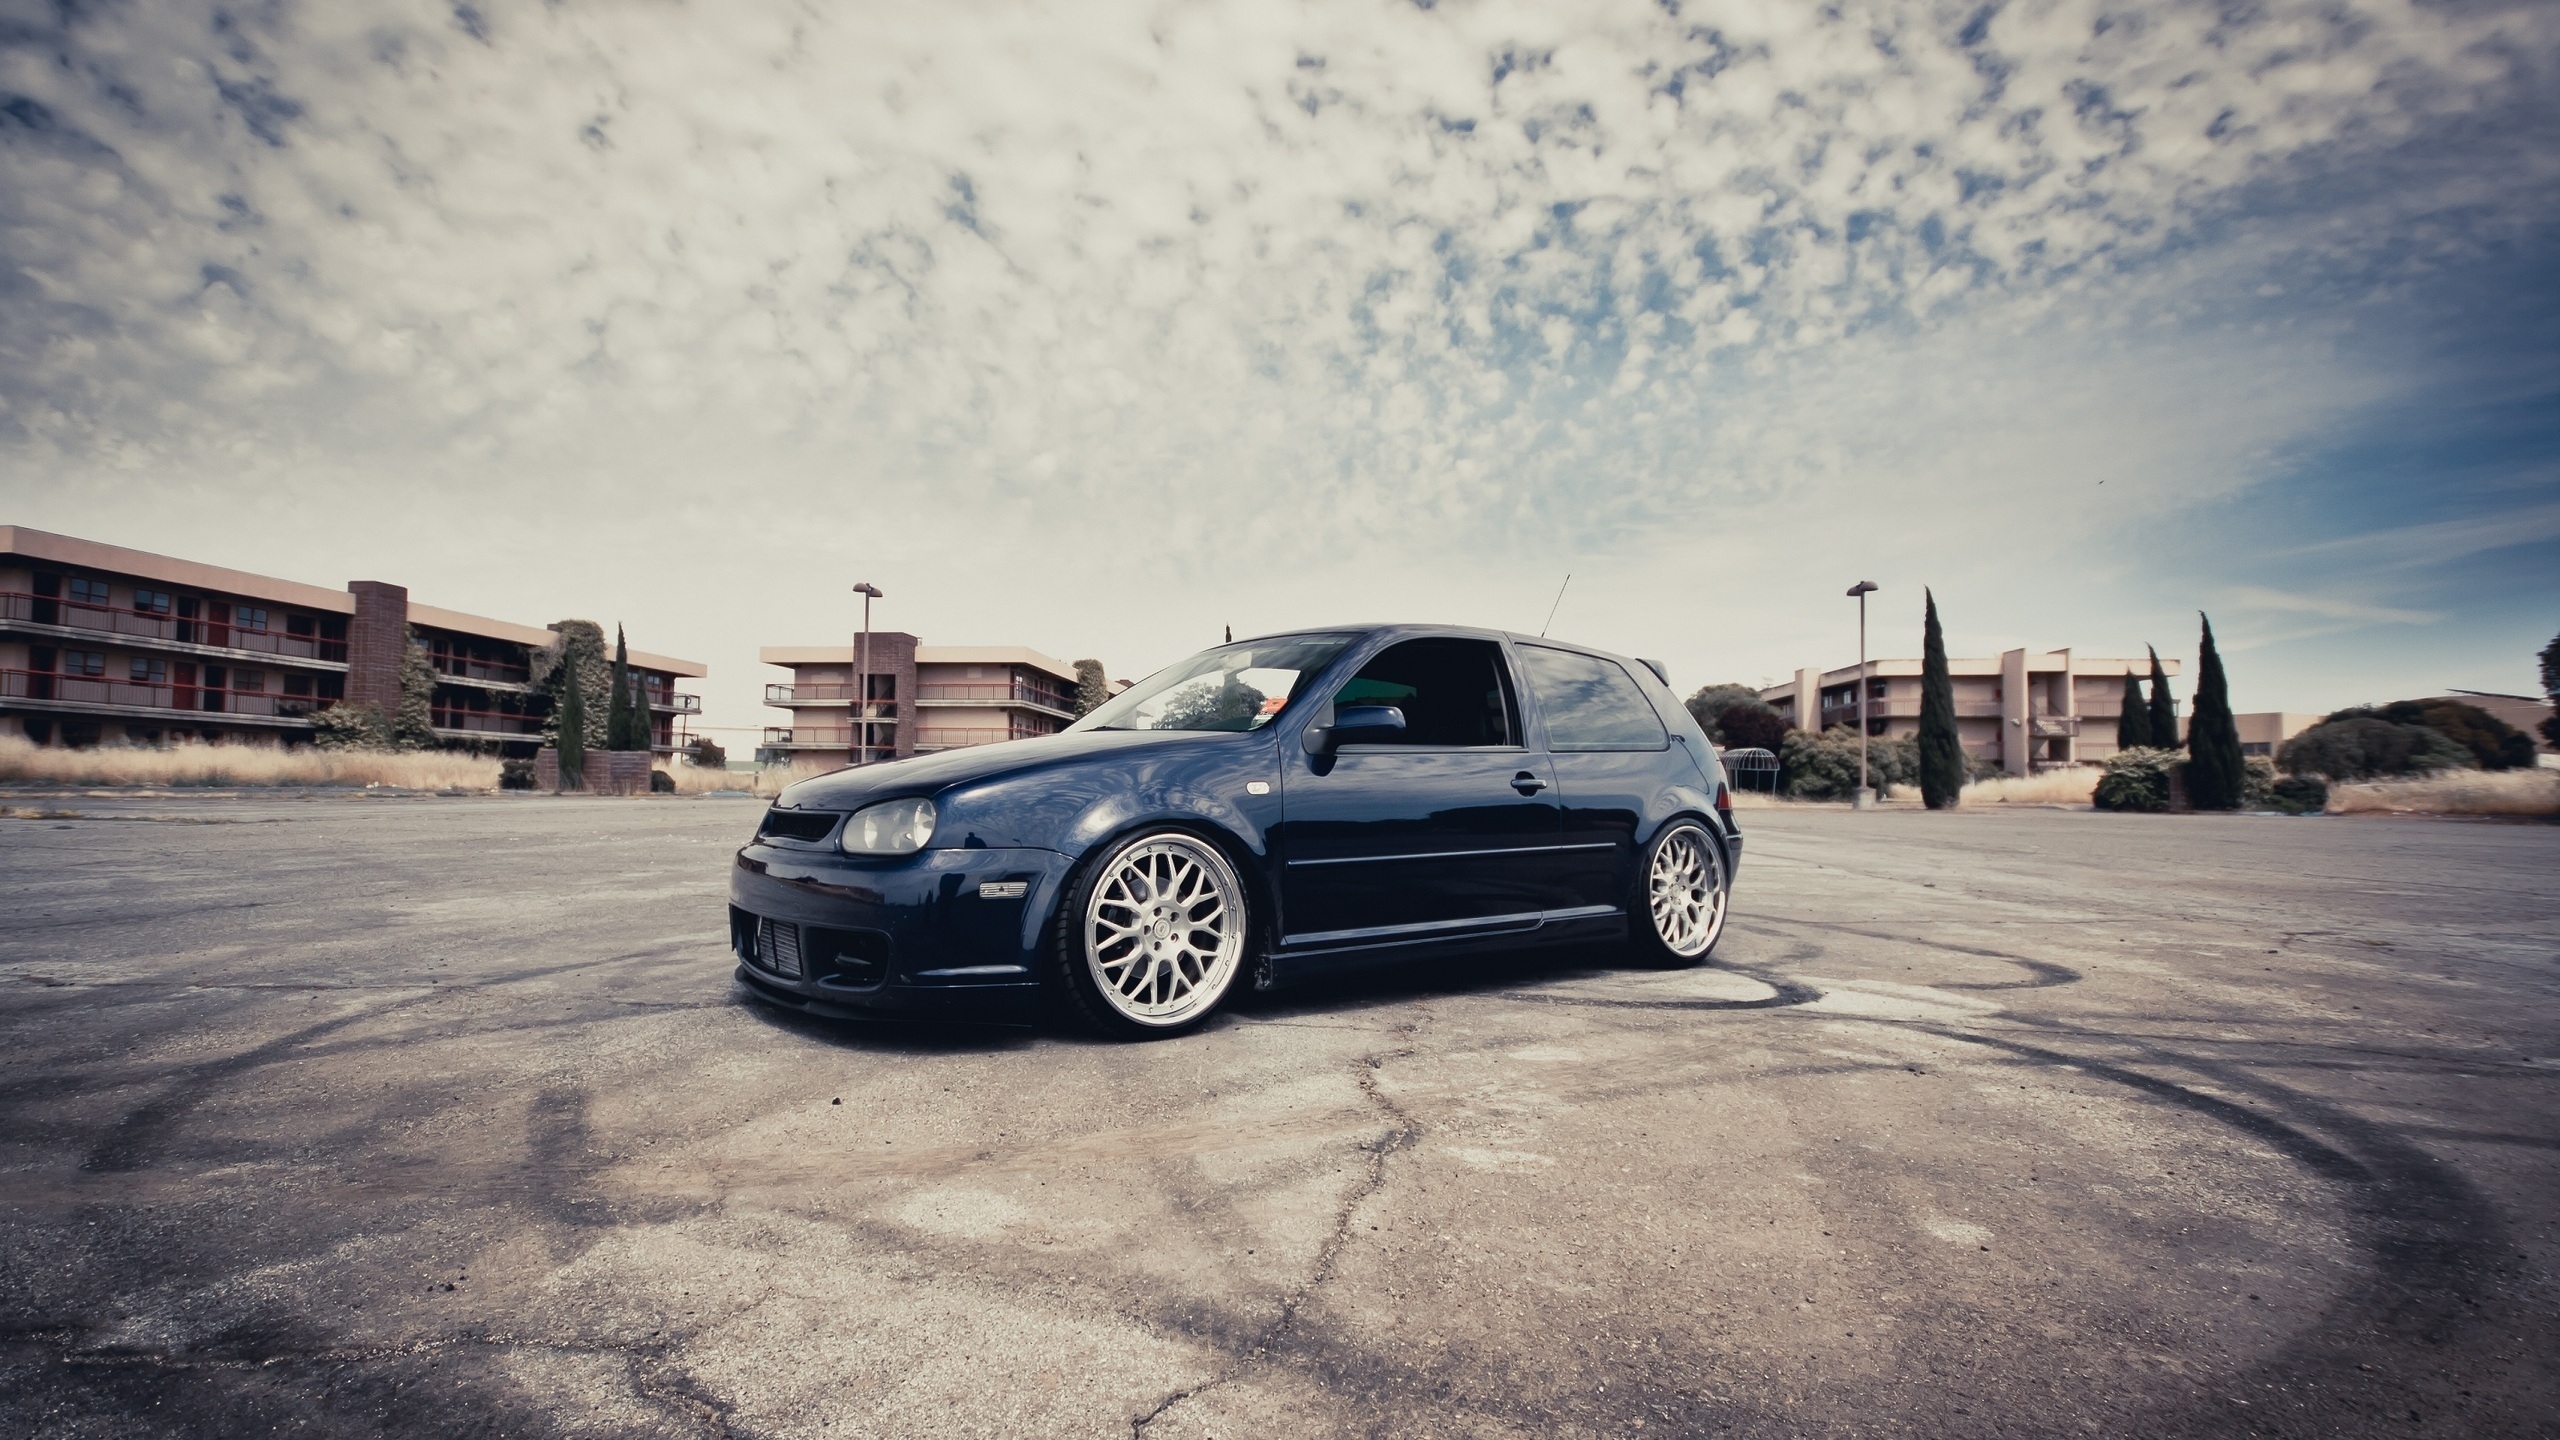 VW Golf III Coupe Tuning for 2560x1440 HDTV resolution